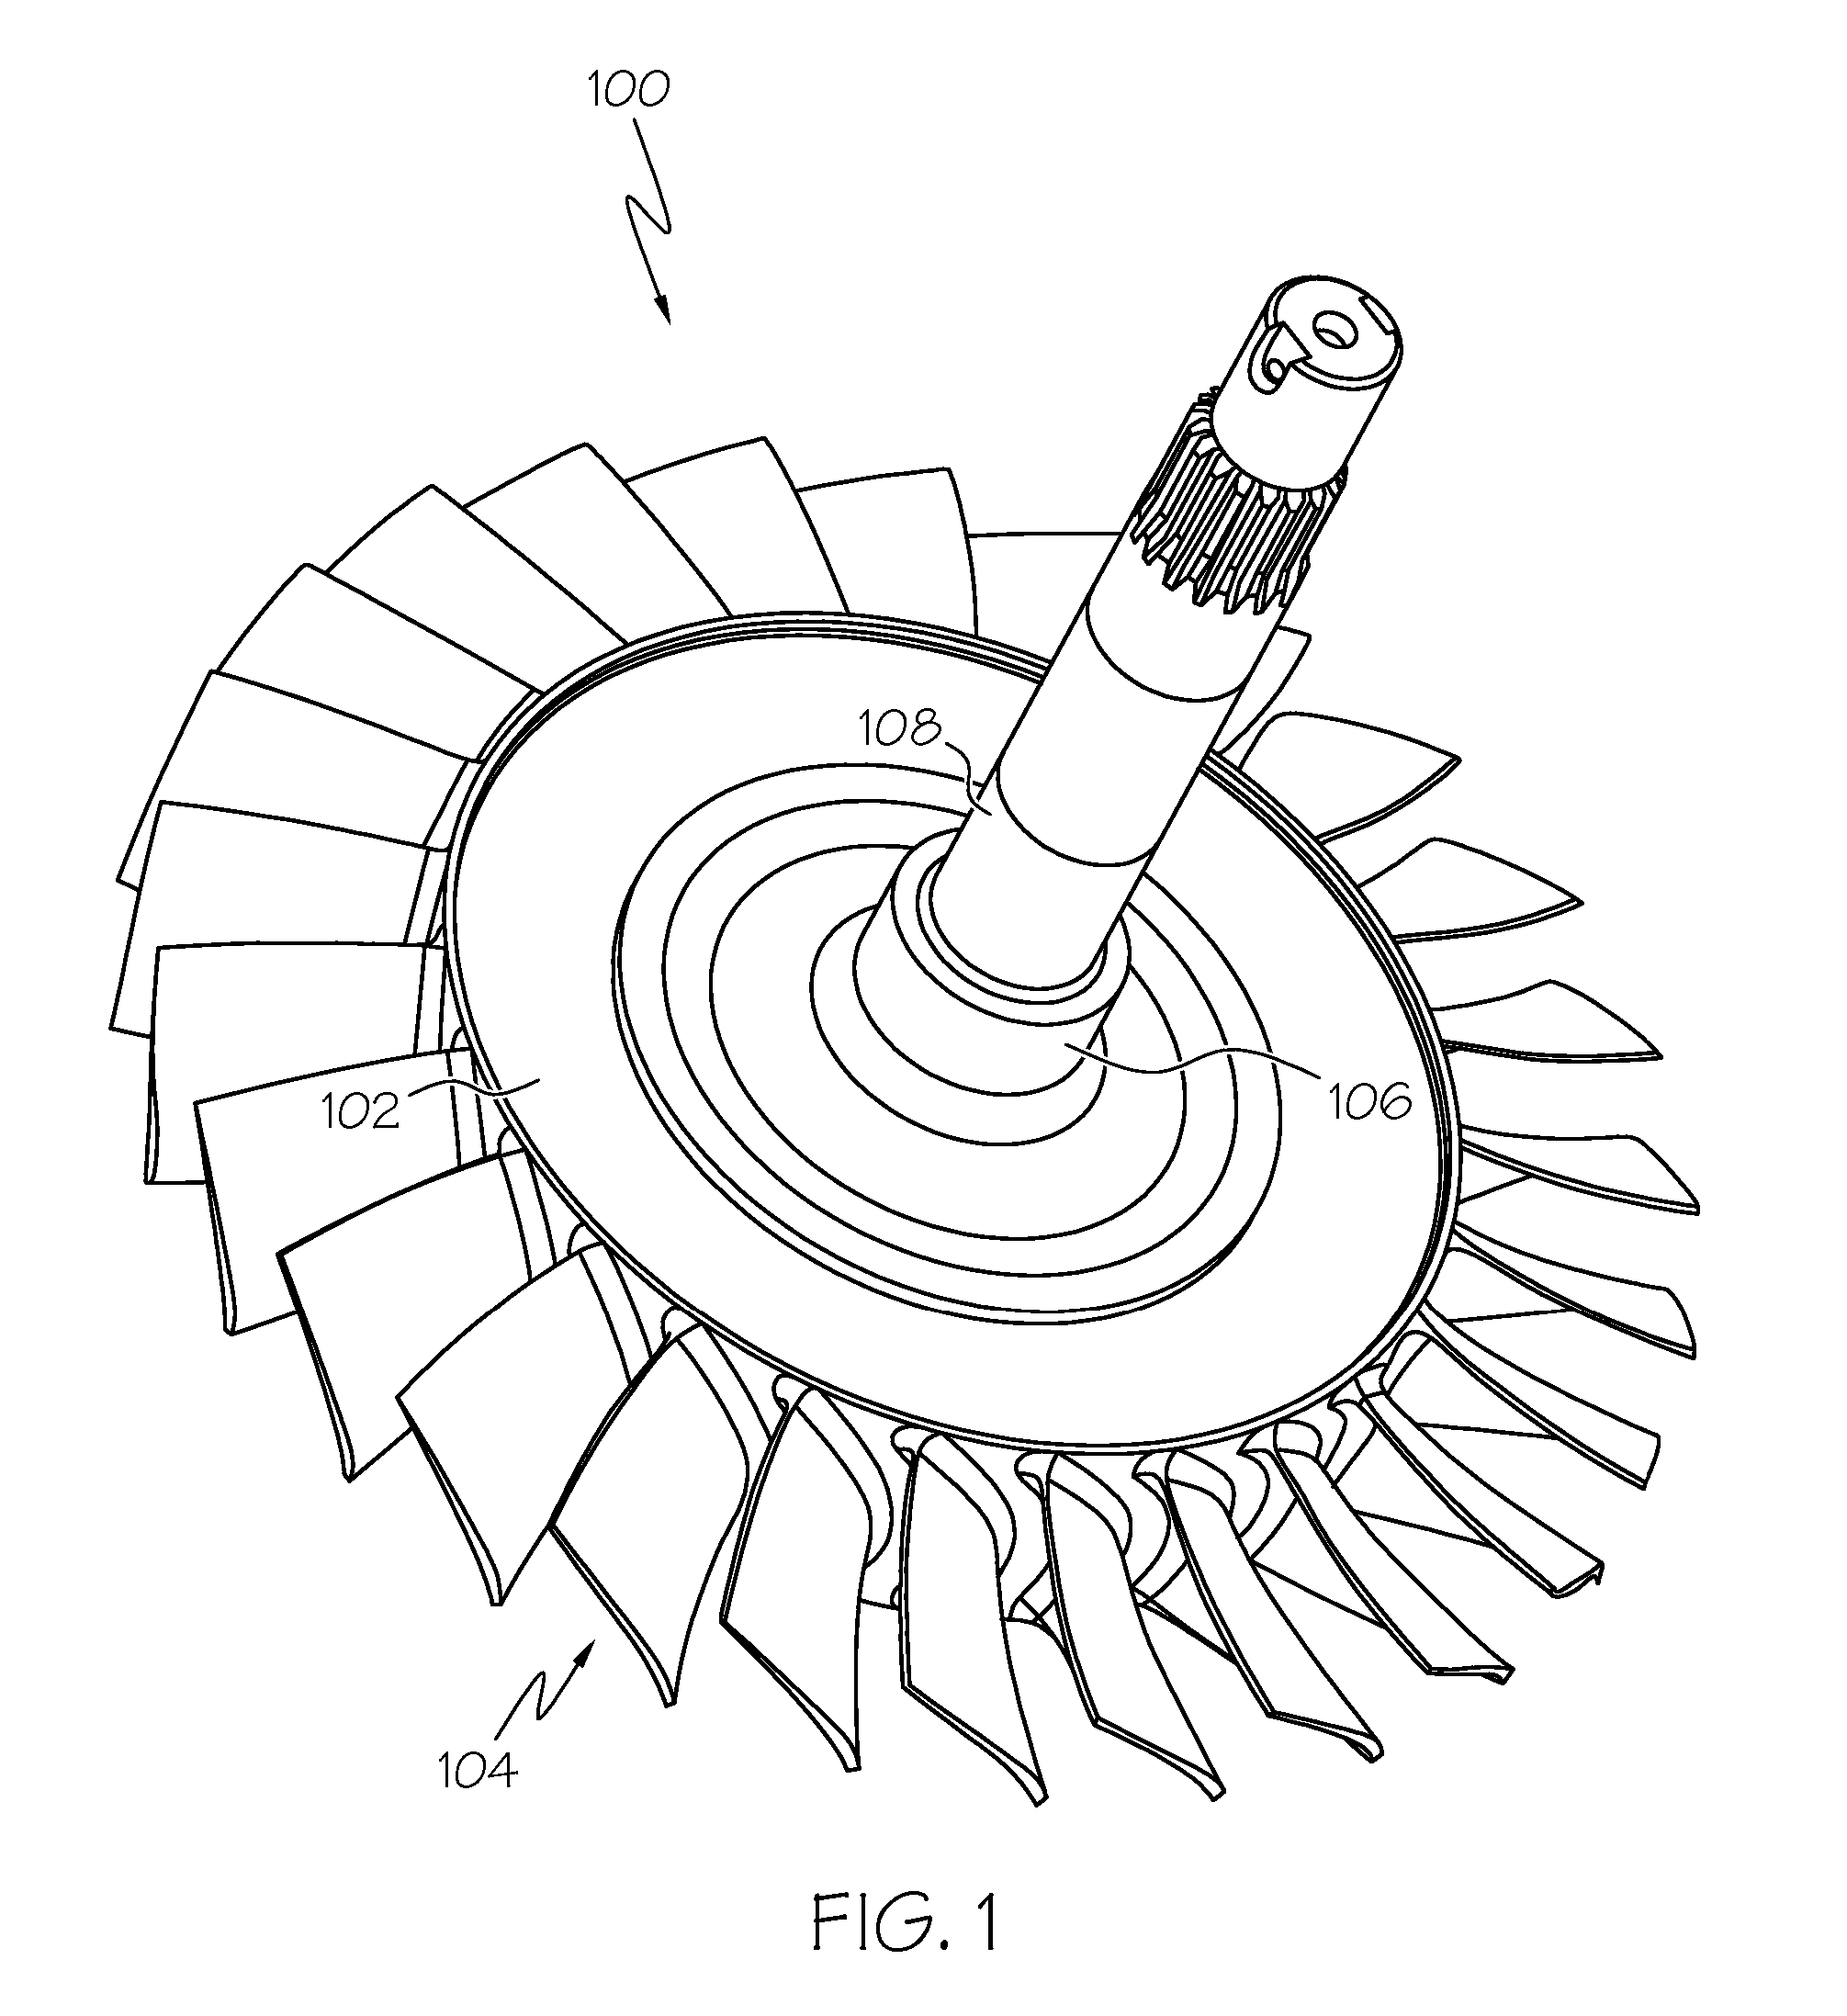 Frequency tailored thickness blade for a turbomachine wheel